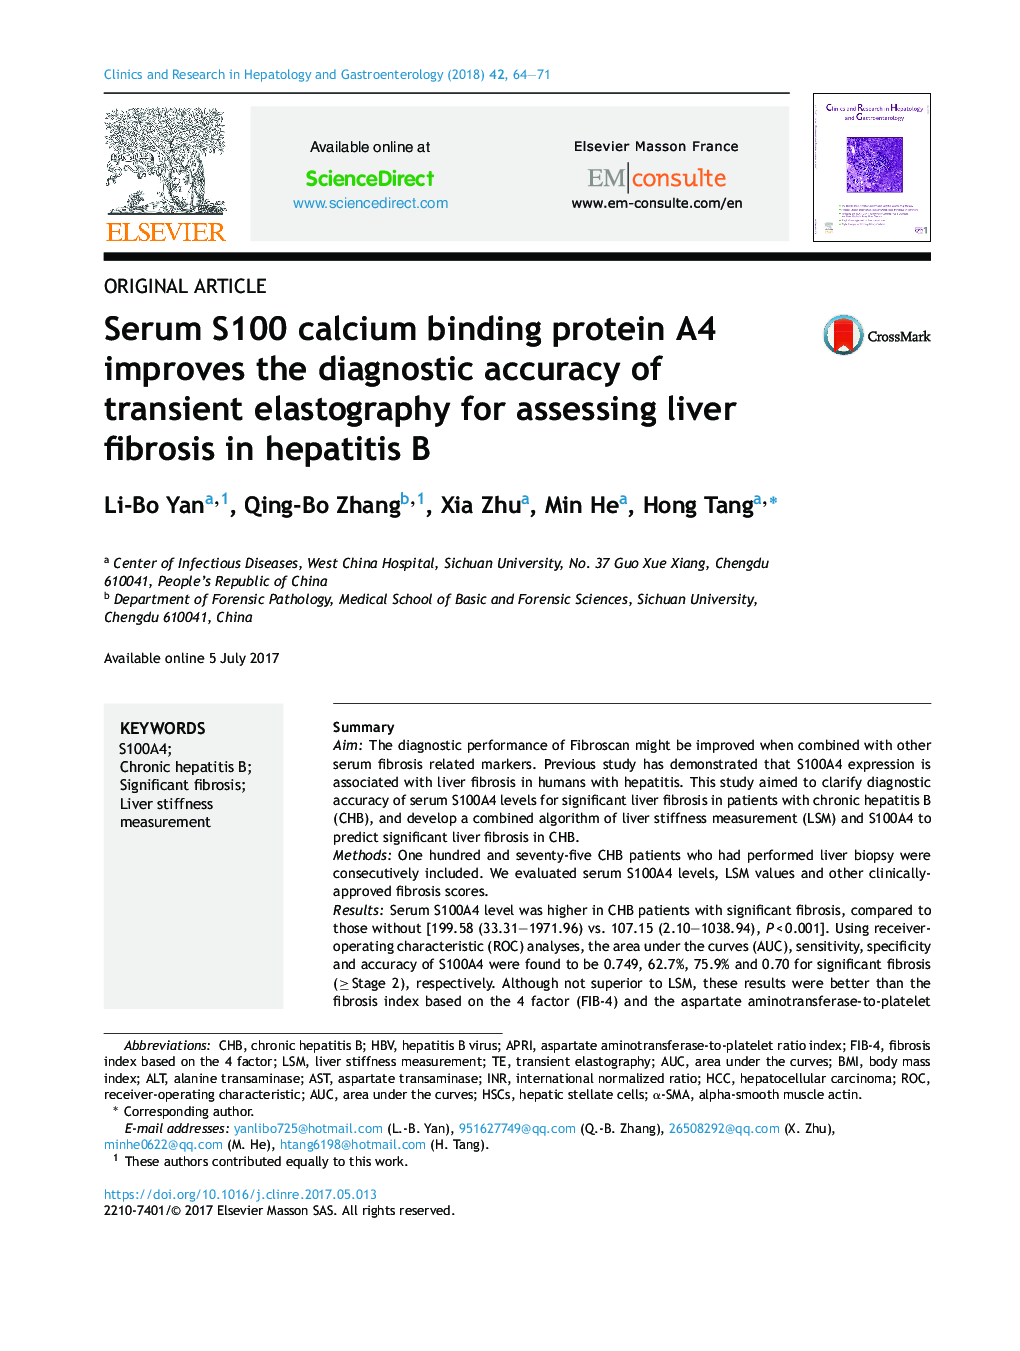 Serum S100 calcium binding protein A4 improves the diagnostic accuracy of transient elastography for assessing liver fibrosis in hepatitis B